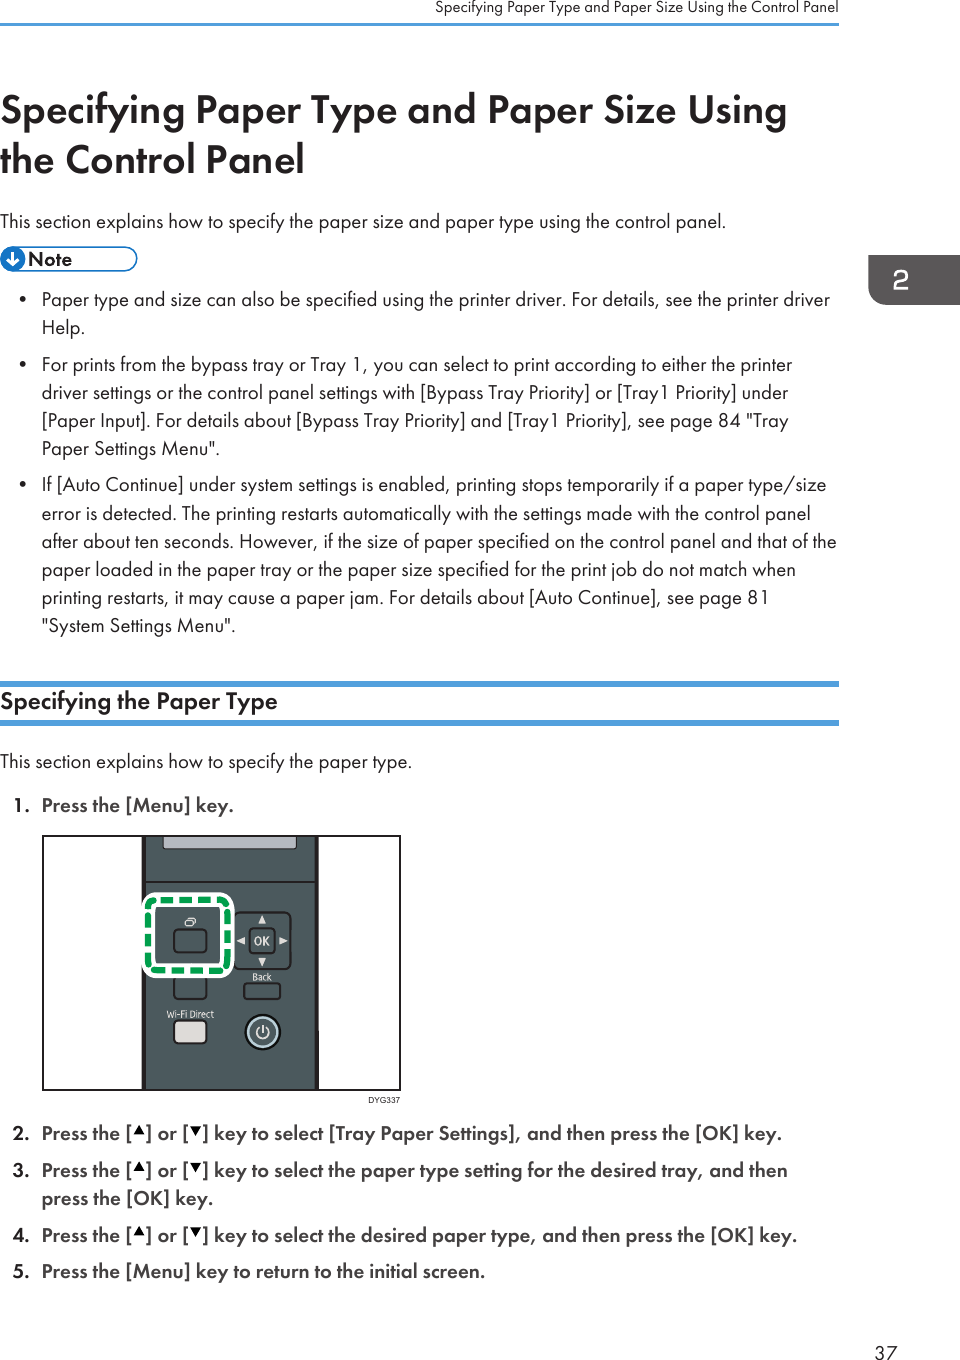 Specifying Paper Type and Paper Size Usingthe Control PanelThis section explains how to specify the paper size and paper type using the control panel.• Paper type and size can also be specified using the printer driver. For details, see the printer driverHelp.• For prints from the bypass tray or Tray 1, you can select to print according to either the printerdriver settings or the control panel settings with [Bypass Tray Priority] or [Tray1 Priority] under[Paper Input]. For details about [Bypass Tray Priority] and [Tray1 Priority], see page 84 &quot;TrayPaper Settings Menu&quot;.• If [Auto Continue] under system settings is enabled, printing stops temporarily if a paper type/sizeerror is detected. The printing restarts automatically with the settings made with the control panelafter about ten seconds. However, if the size of paper specified on the control panel and that of thepaper loaded in the paper tray or the paper size specified for the print job do not match whenprinting restarts, it may cause a paper jam. For details about [Auto Continue], see page 81&quot;System Settings Menu&quot;.Specifying the Paper TypeThis section explains how to specify the paper type.1. Press the [Menu] key.DYG3372. Press the [ ] or [ ] key to select [Tray Paper Settings], and then press the [OK] key.3. Press the [ ] or [ ] key to select the paper type setting for the desired tray, and thenpress the [OK] key.4. Press the [ ] or [ ] key to select the desired paper type, and then press the [OK] key.5. Press the [Menu] key to return to the initial screen.Specifying Paper Type and Paper Size Using the Control Panel37